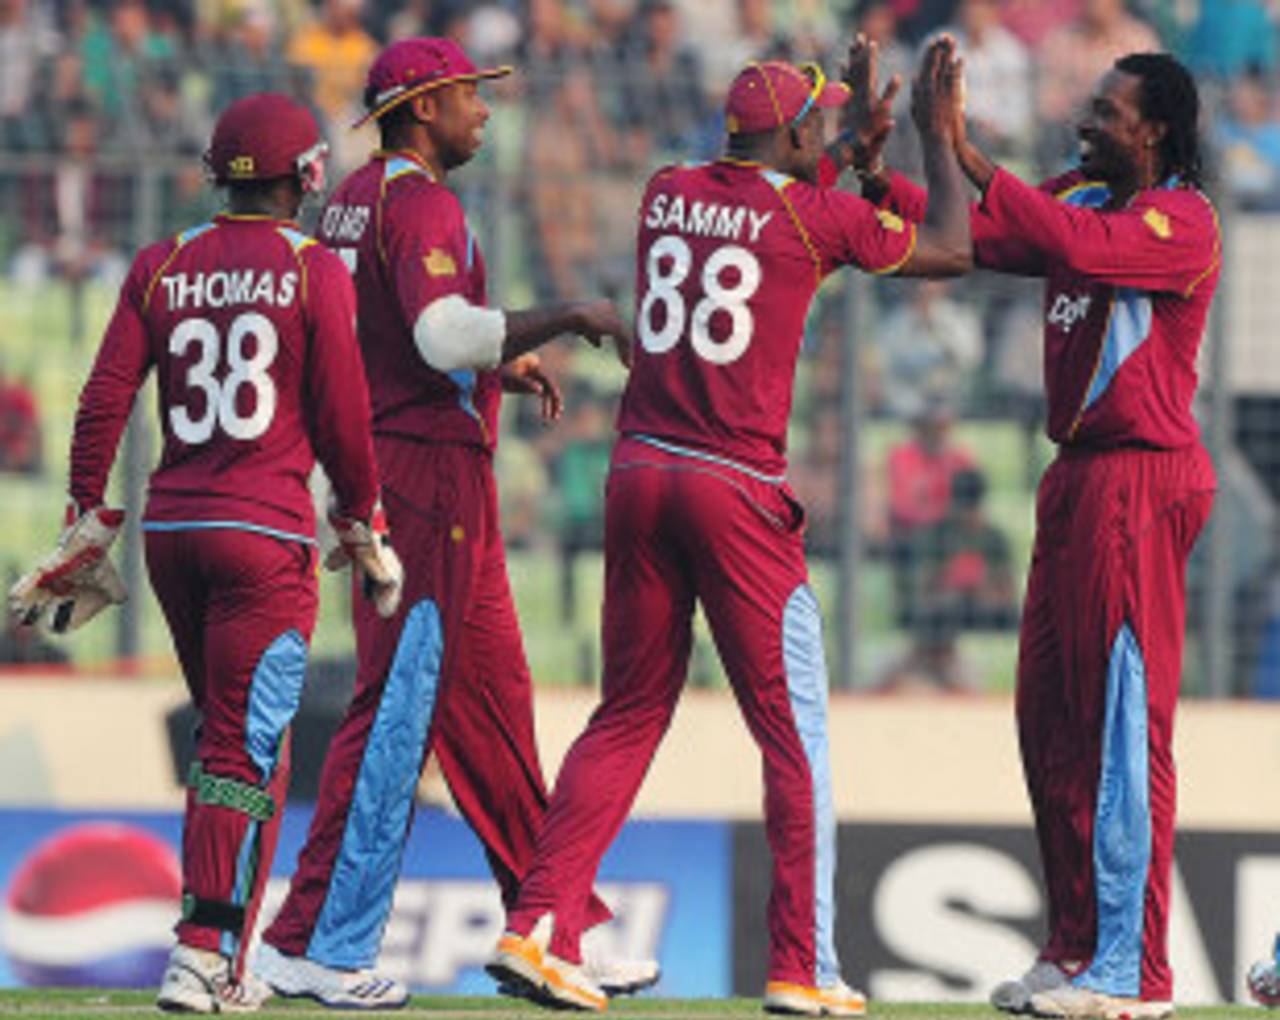 Chris Gayle and his team-mates celebrate a wicket, Bangladesh v West Indies, 3rd ODI, Mirpur, December 5, 2012